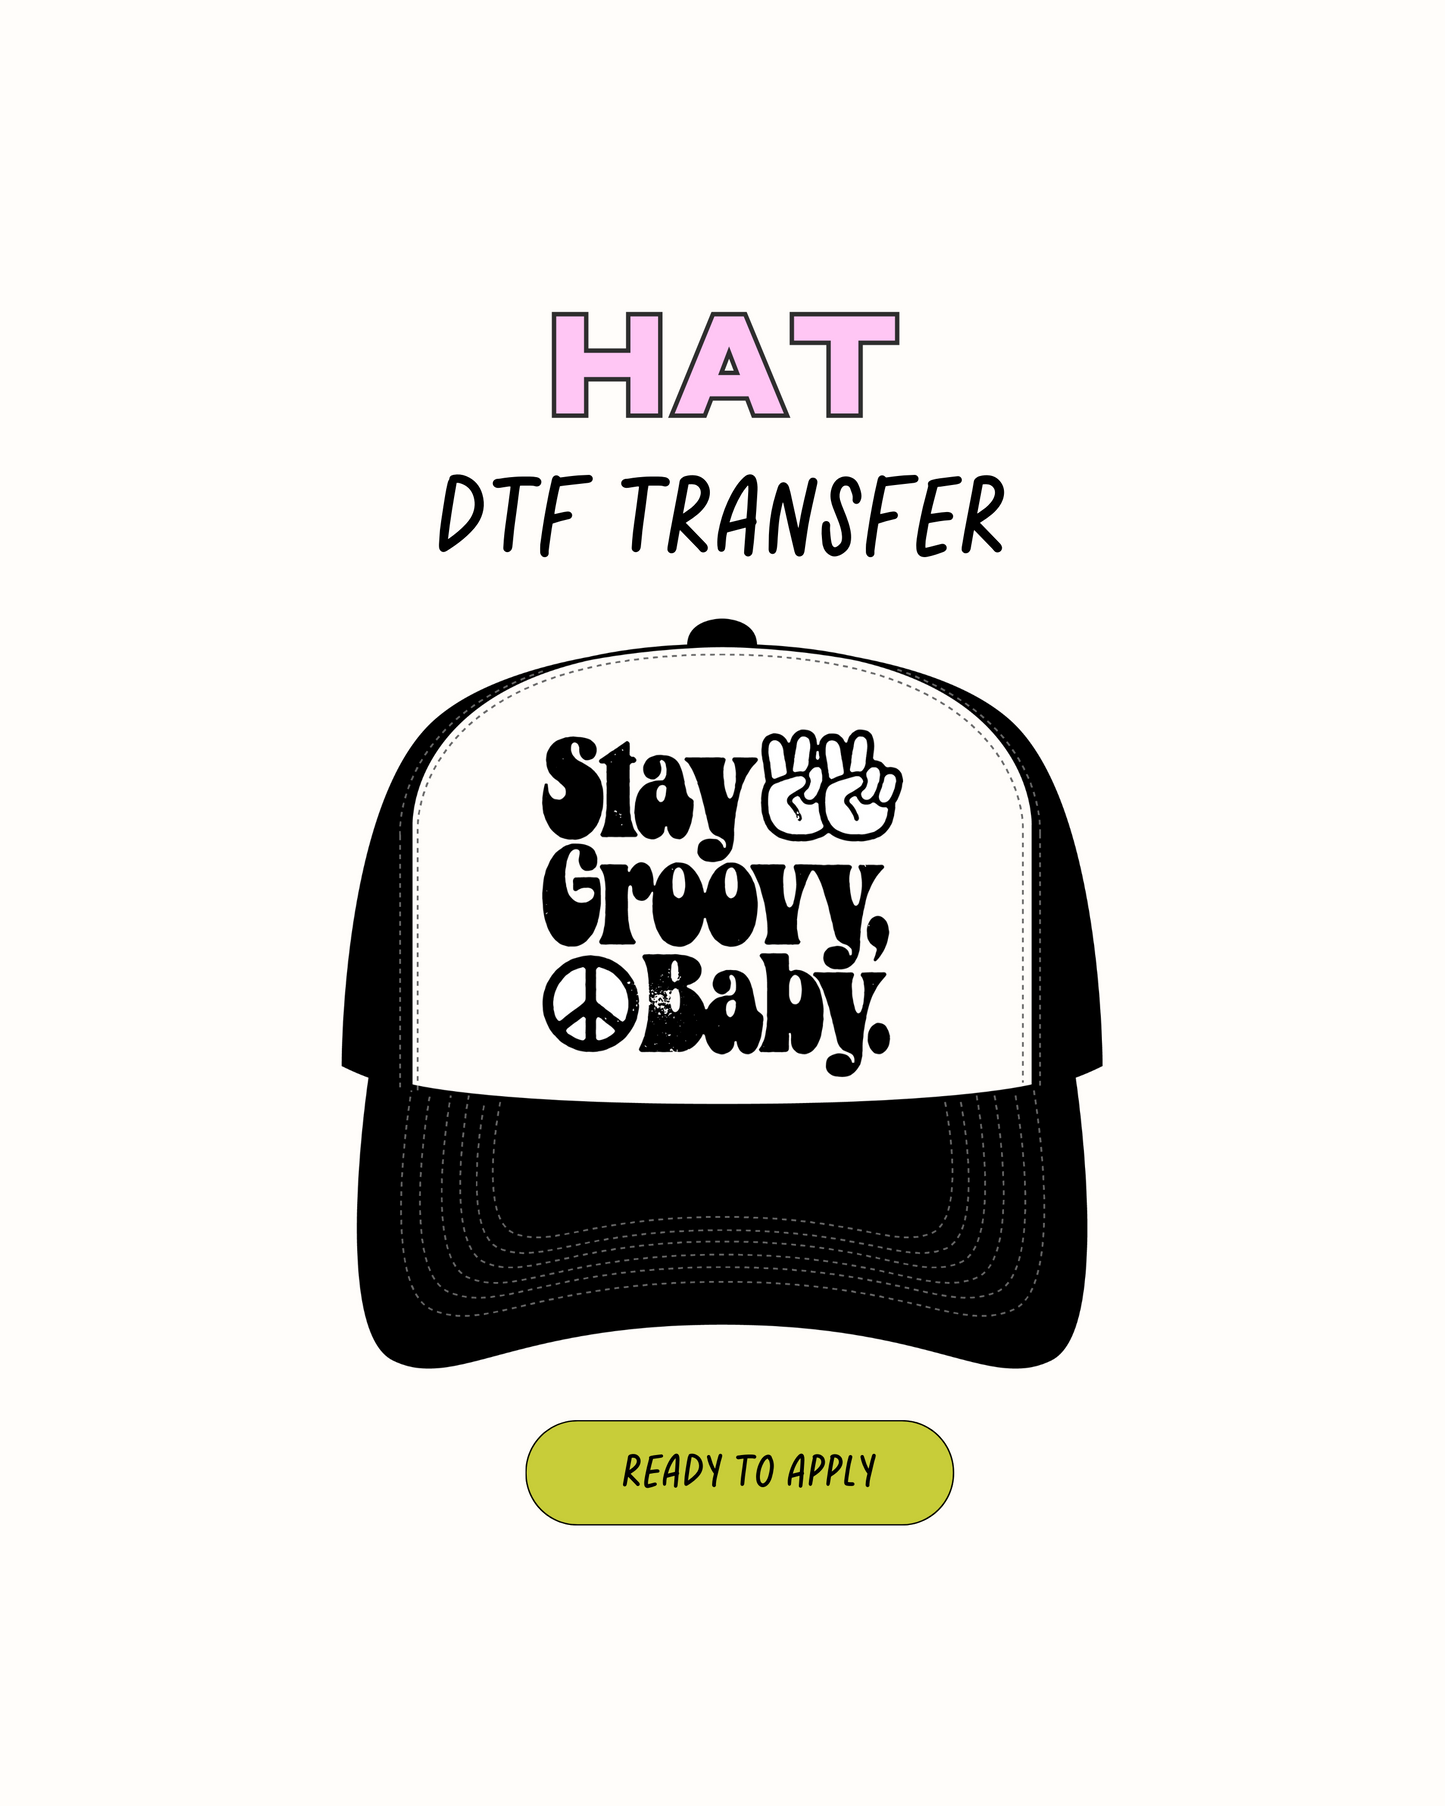 Stay groovy baby - DTF Hat Transfers